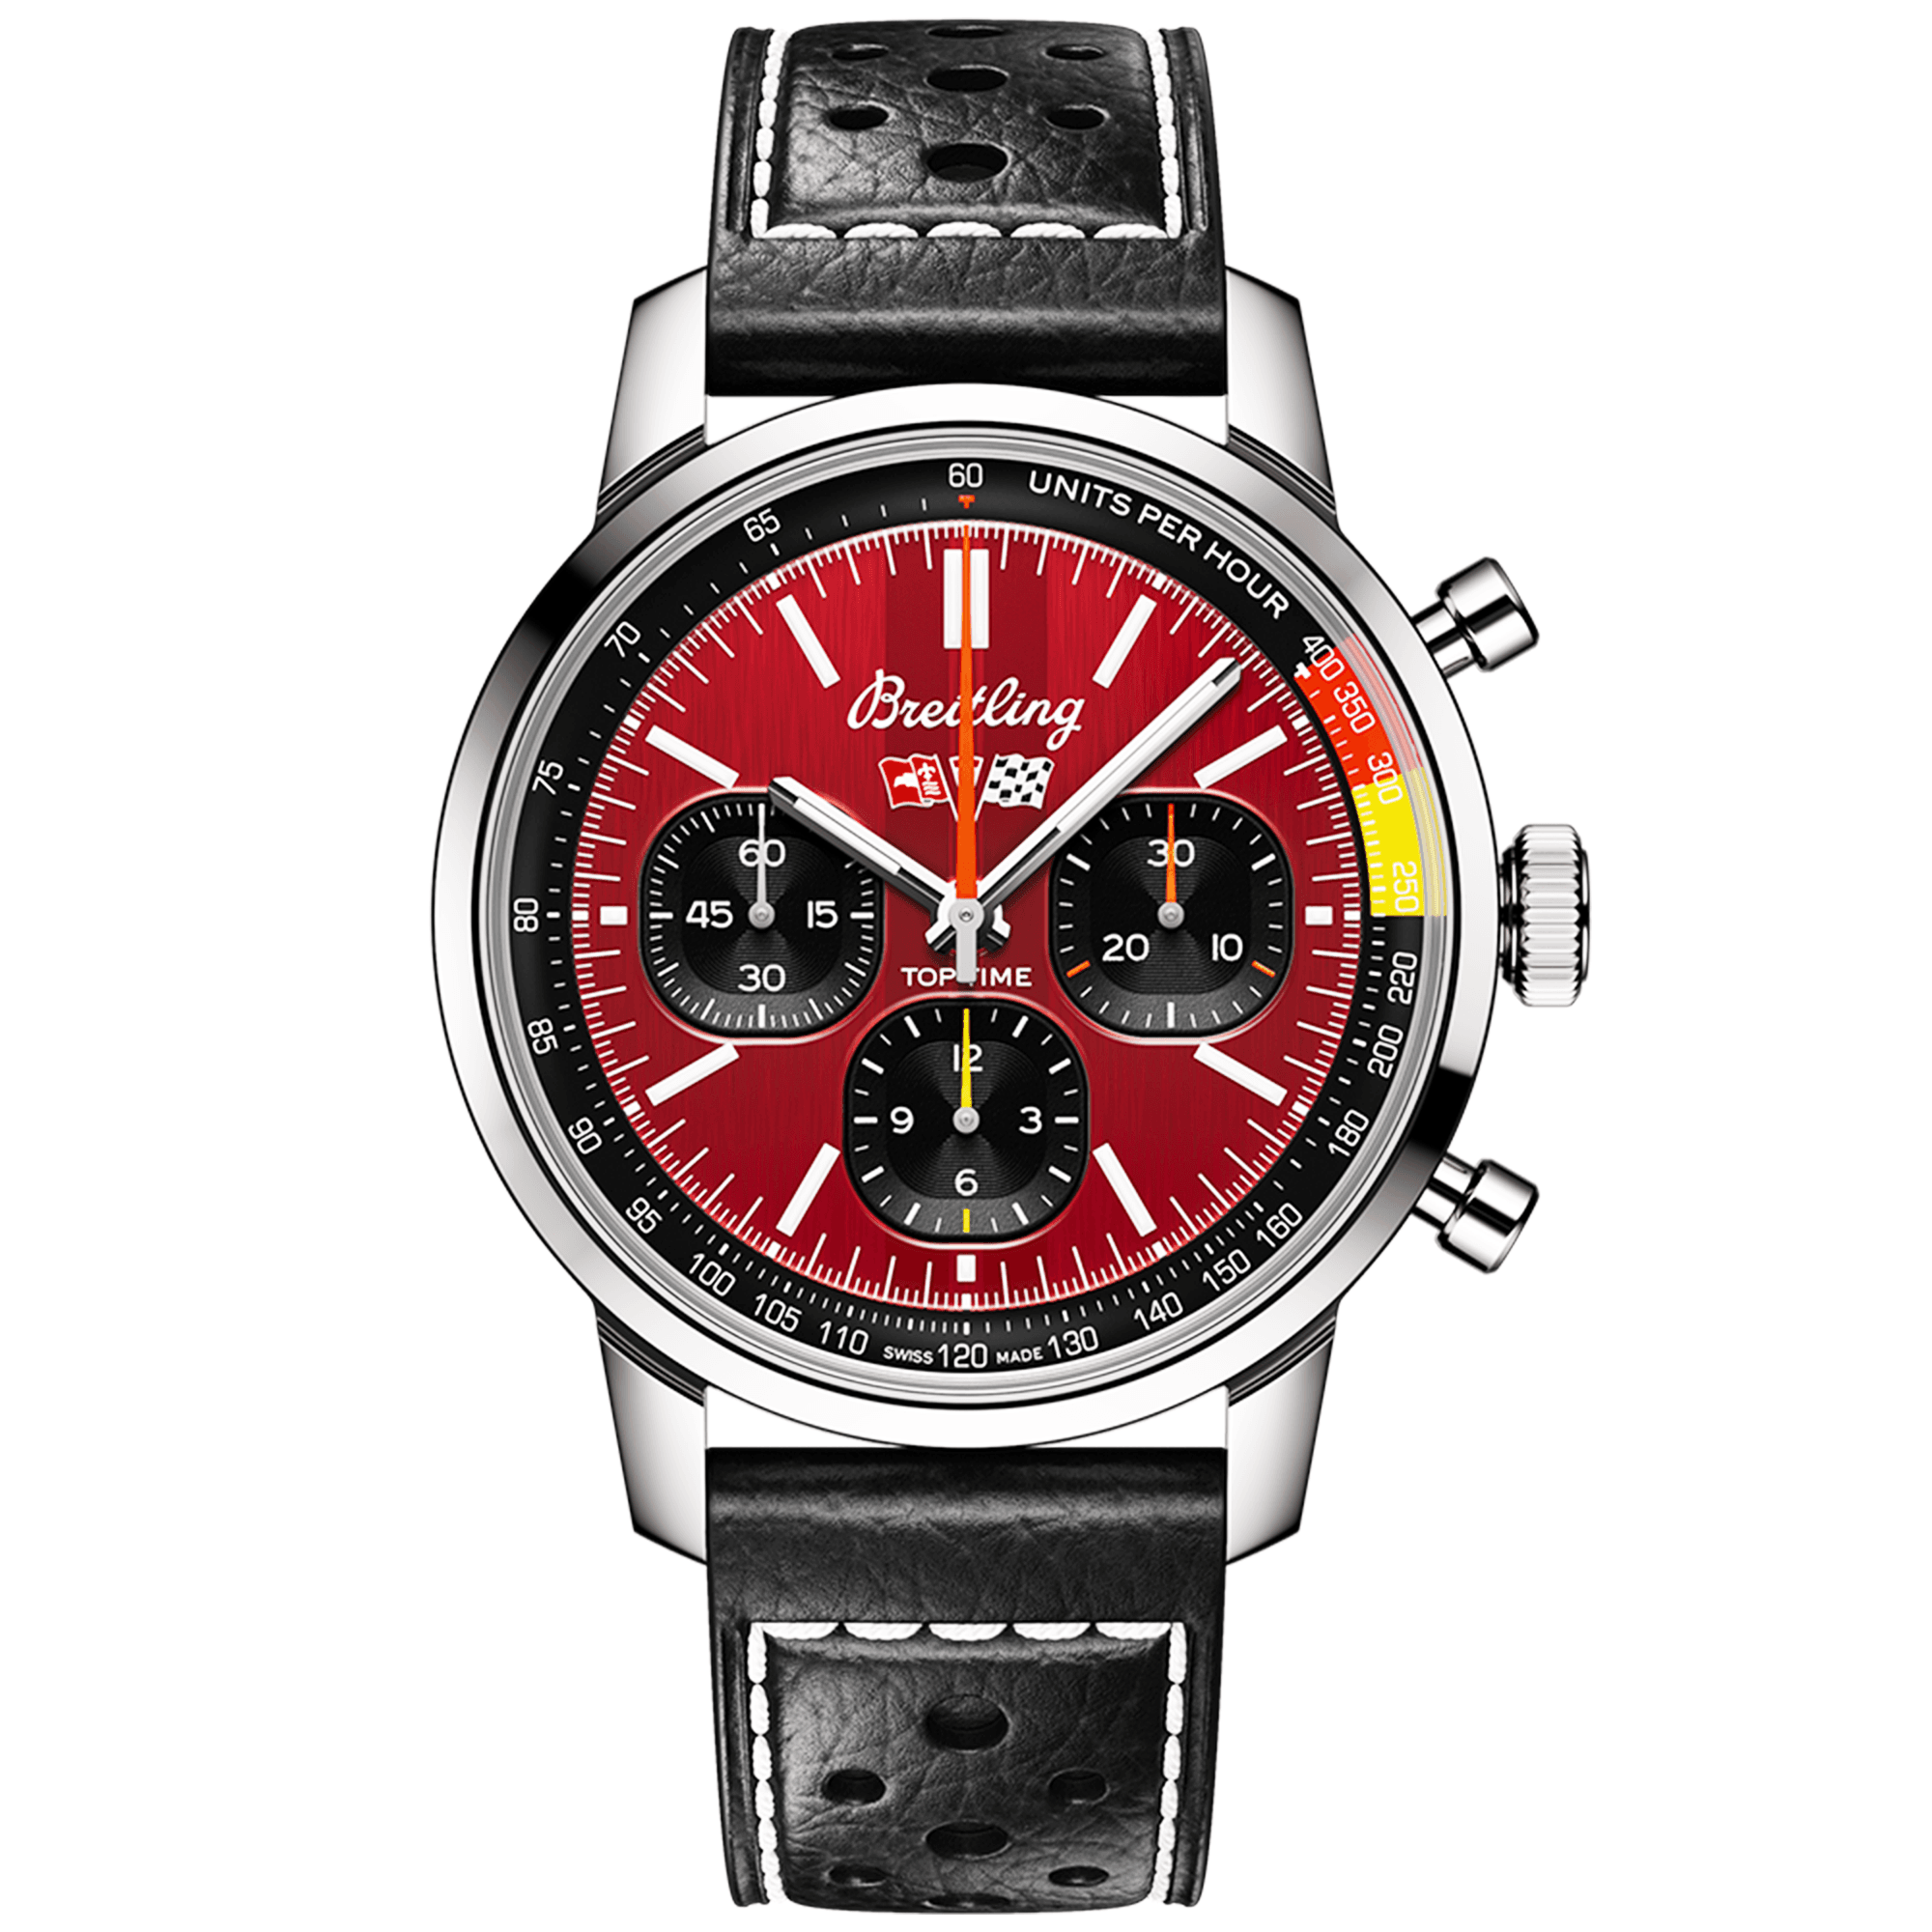 Top Time B01 Chevrolet Corvette 41mm Red Dial Automatic Strap Watch